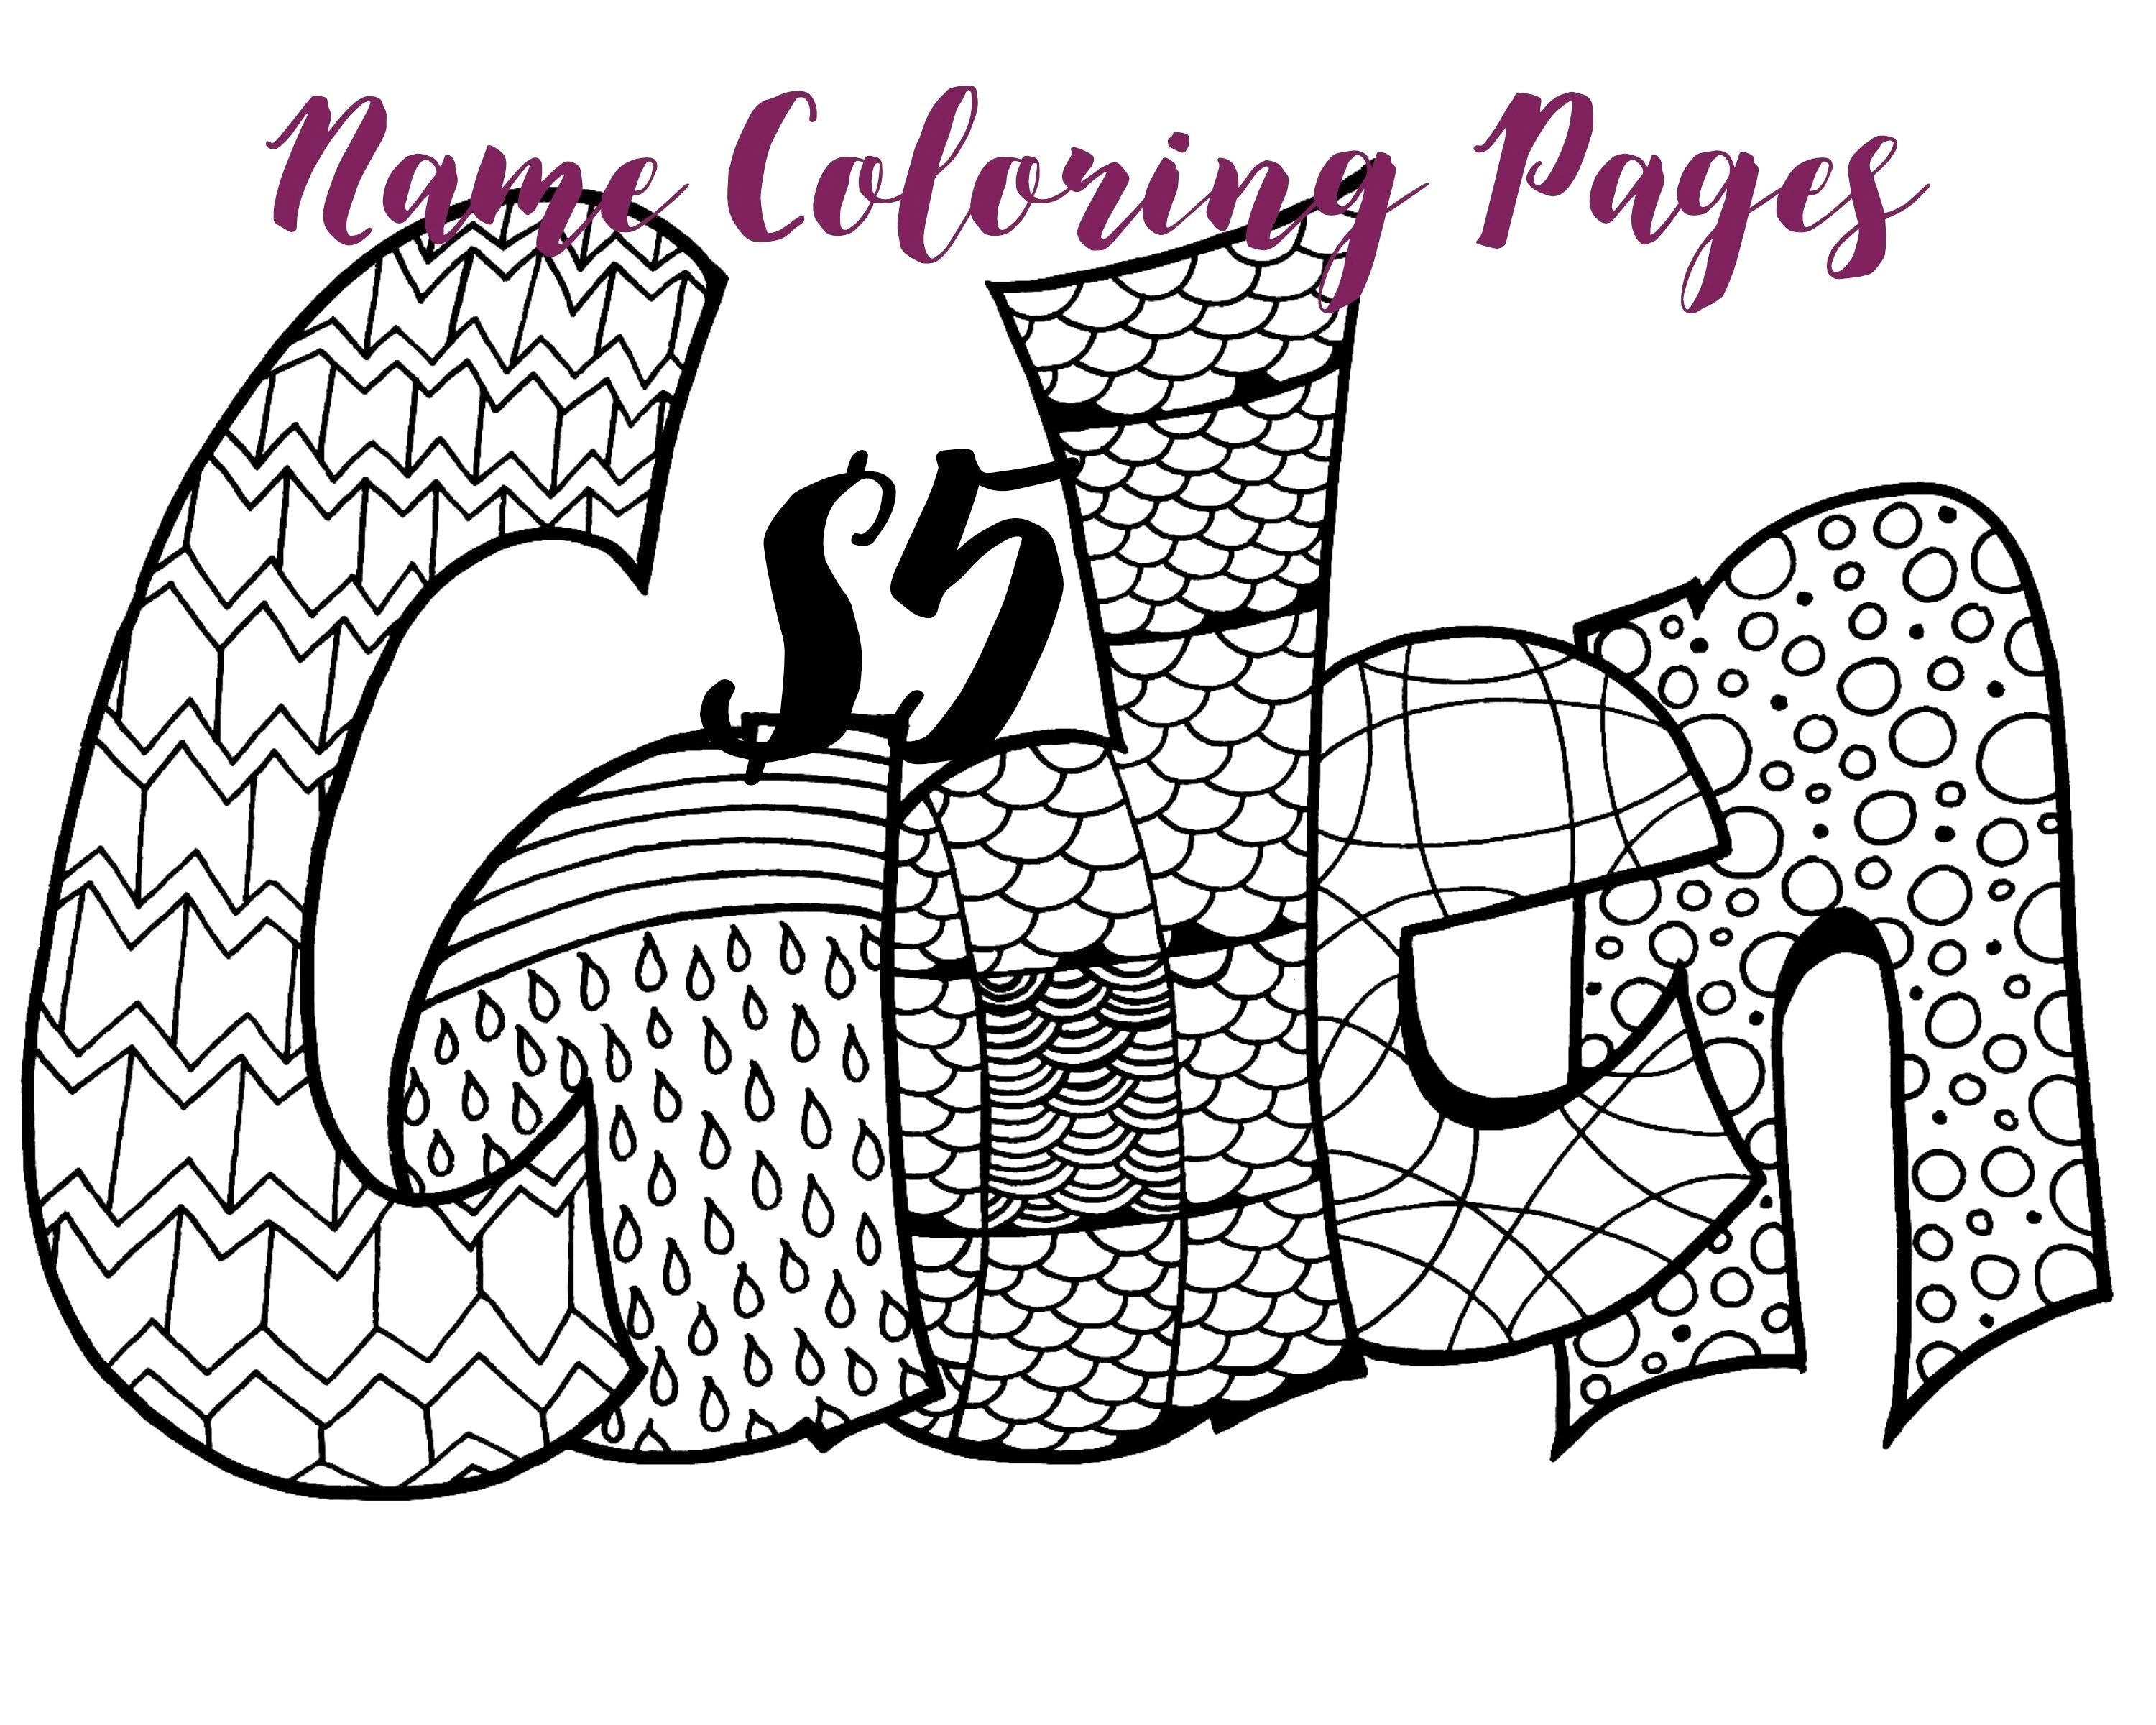 Name Coloring Page Coloring Pages Creater Name Coloring Pages Wallpaper Art Hd For